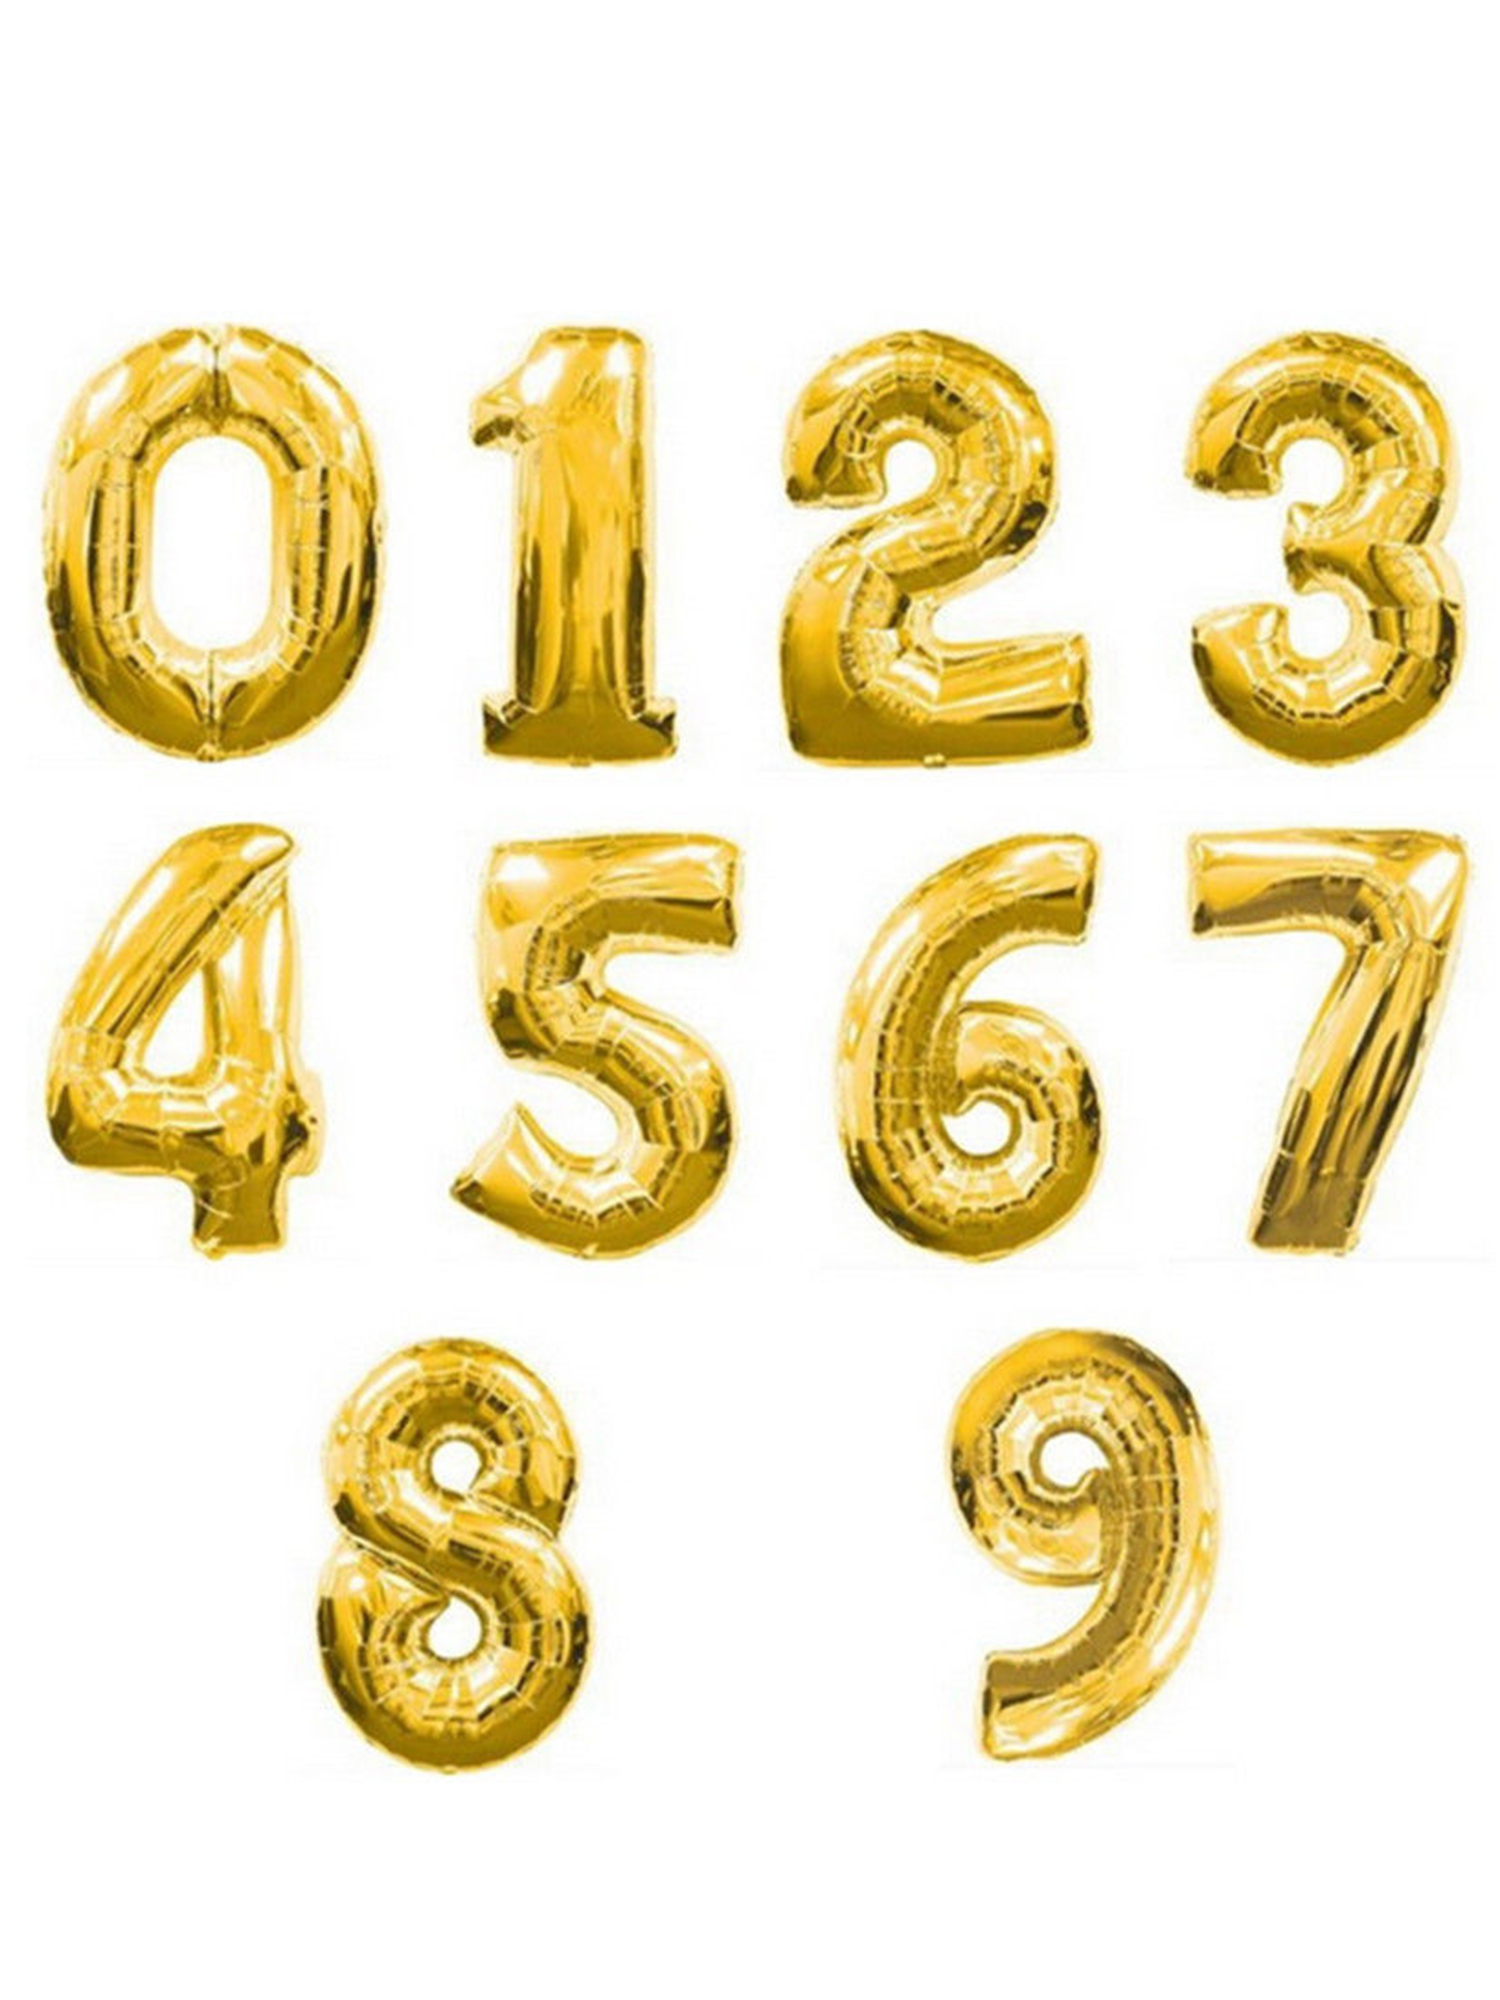 32/"//40/" Foil 0-9 Number Balloons Helium Large Happy Birthday Party Decor